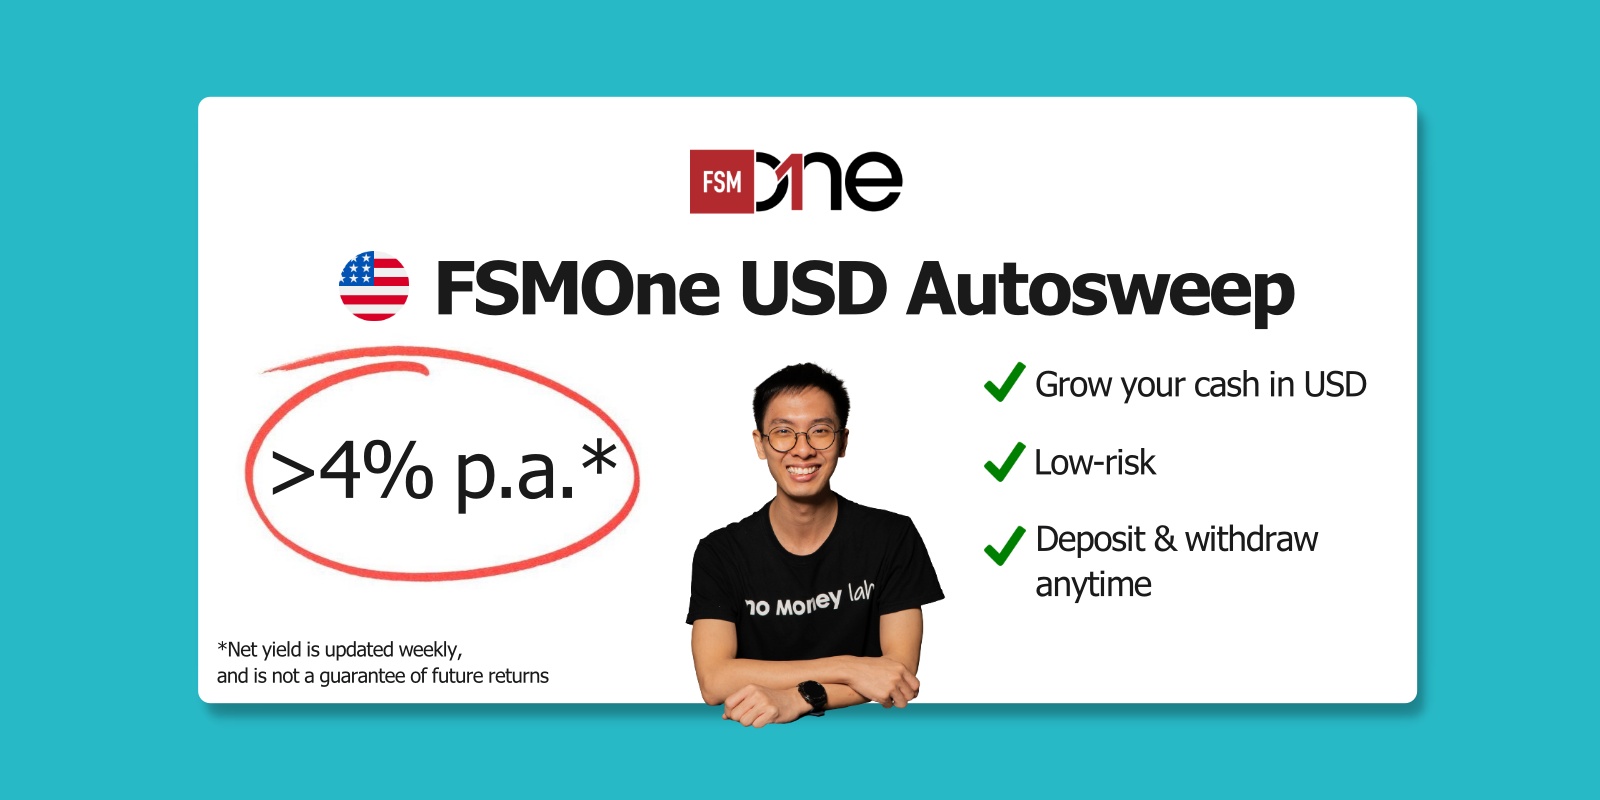 FSMOne USD Autosweep review Malaysia - Save and earn yield in USD